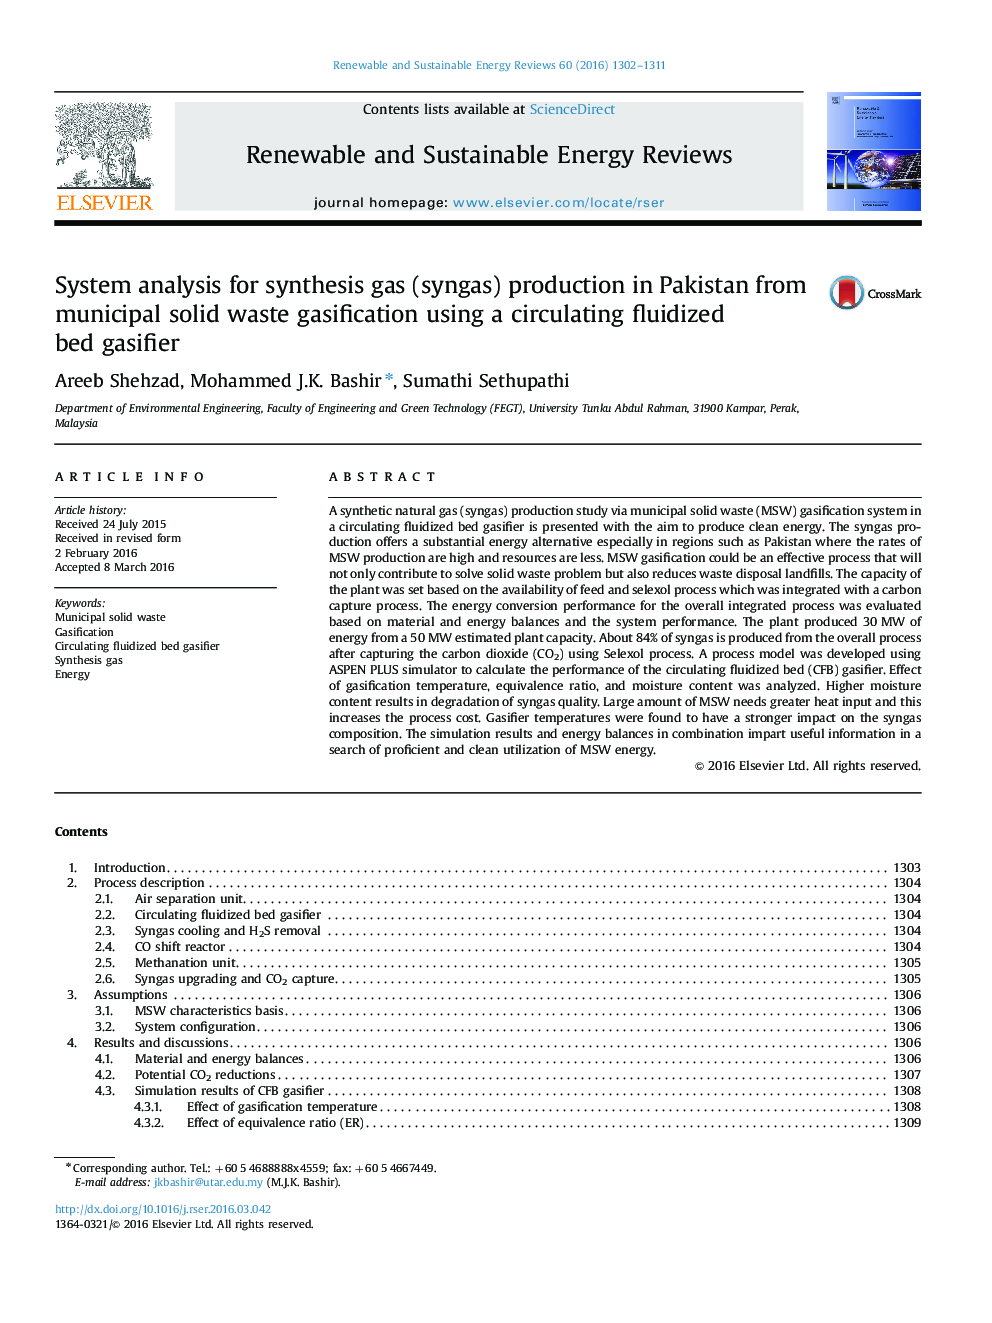 System analysis for synthesis gas (syngas) production in Pakistan from municipal solid waste gasification using a circulating fluidized bed gasifier